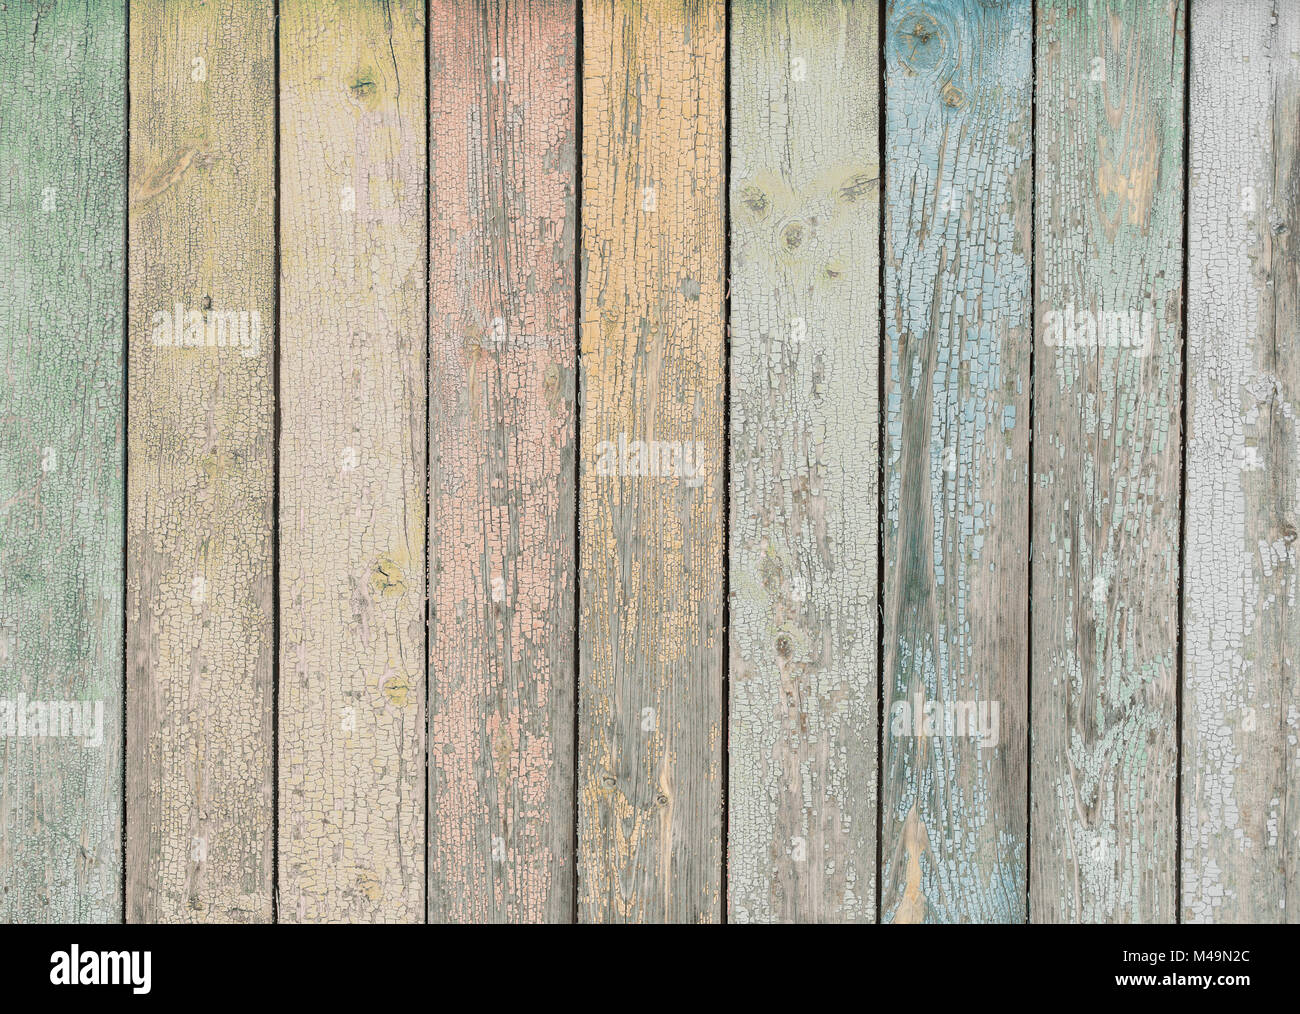 wood background or texture with pastel colored planks Stock Photo